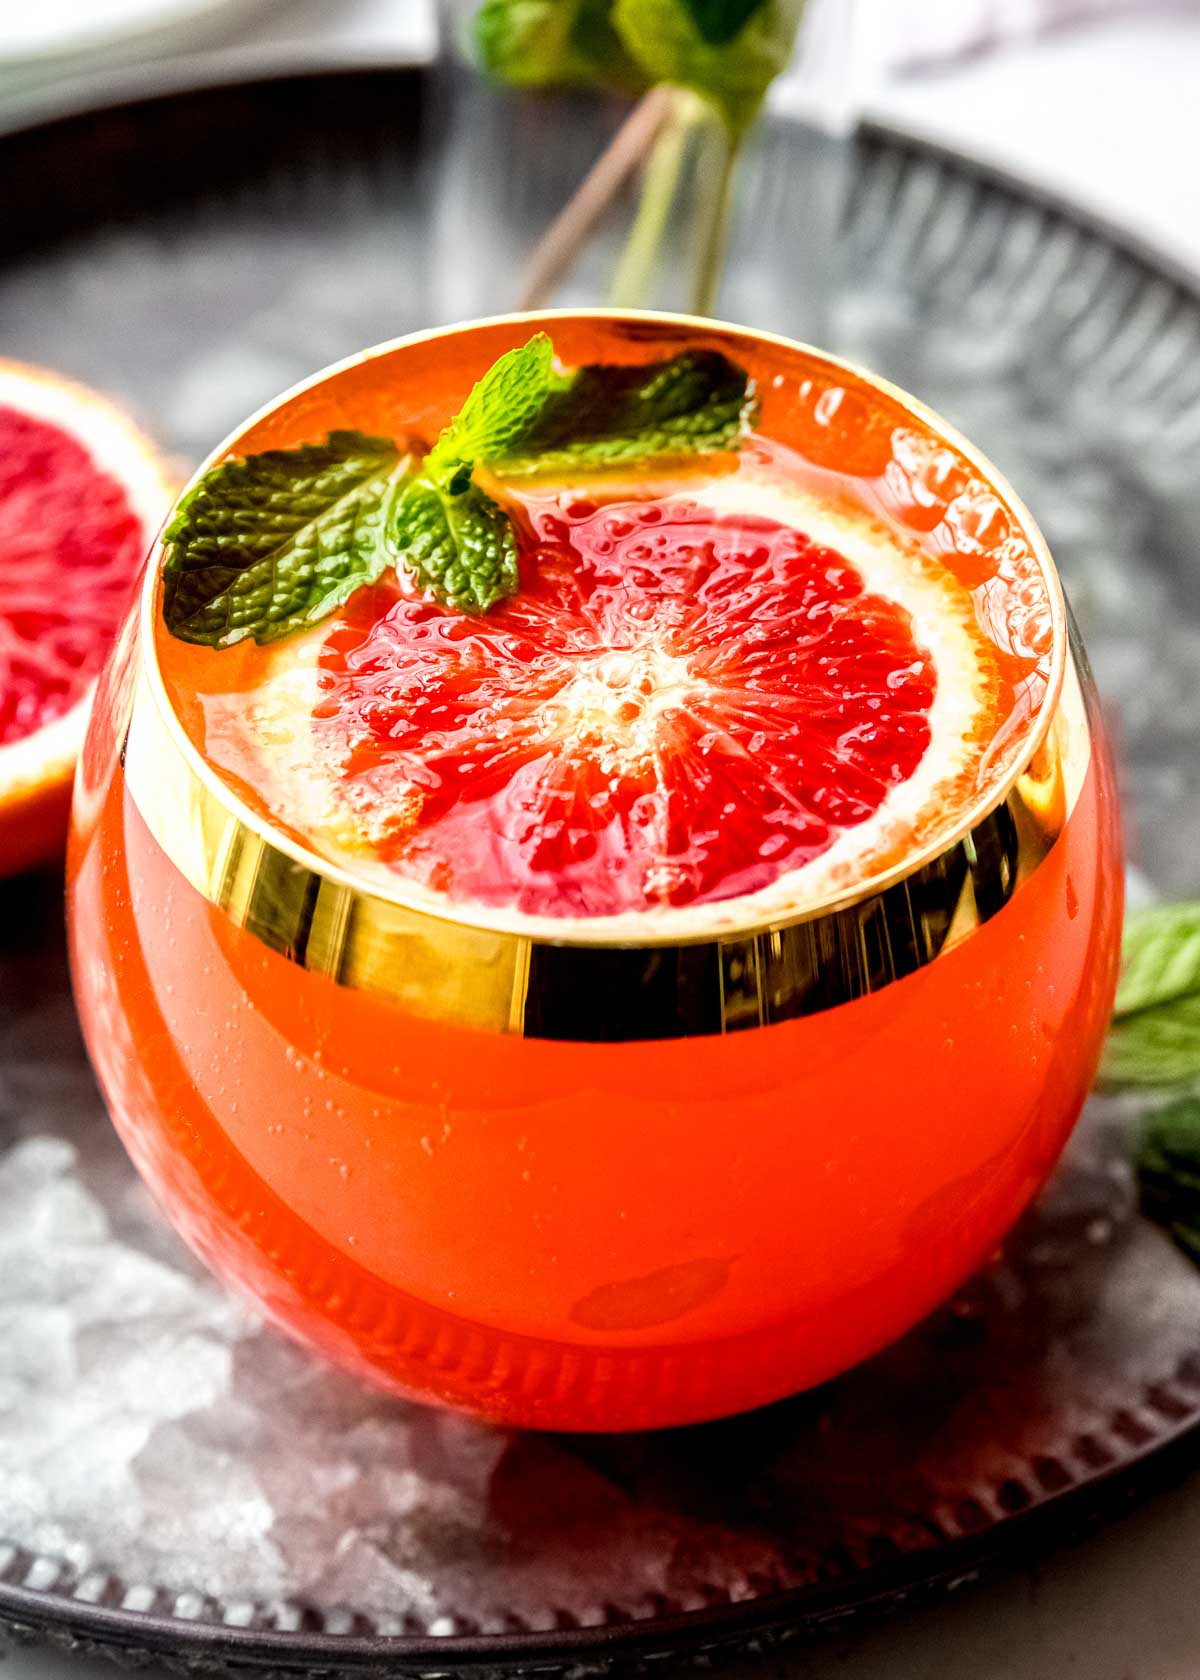 a close up shot of a blood orange cocktail recipe garnished with mint